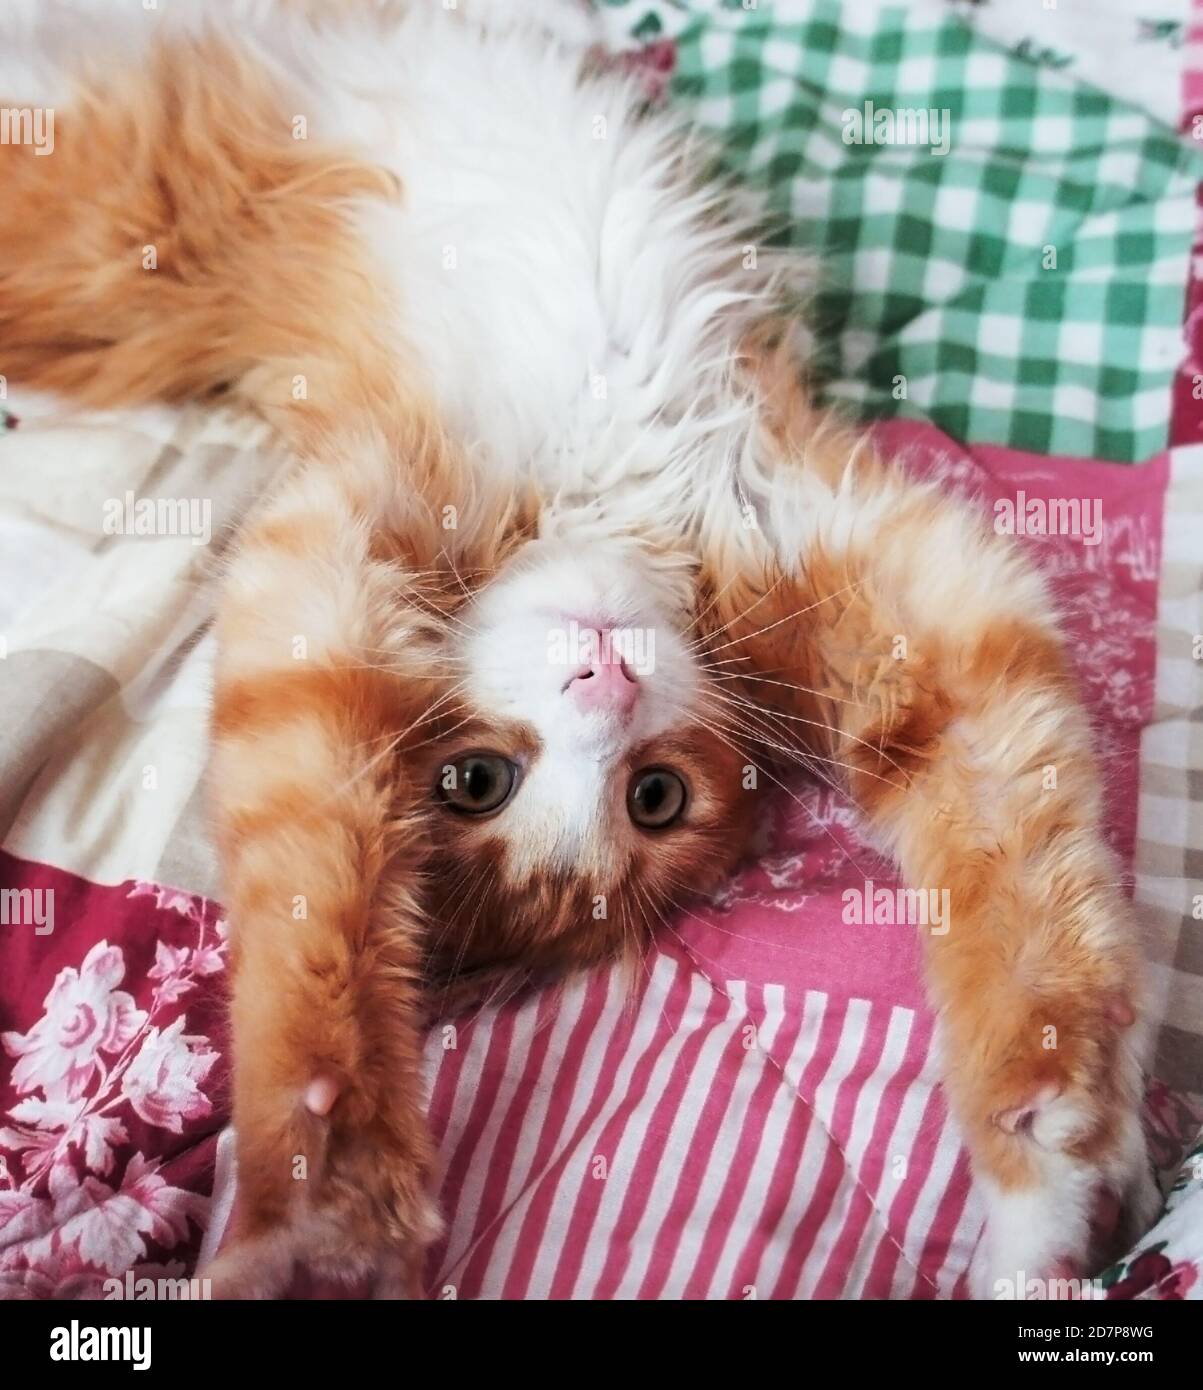 Ginger white fluffy kitten with pink nose stretching on a colored pink-green blanket in bed Stock Photo